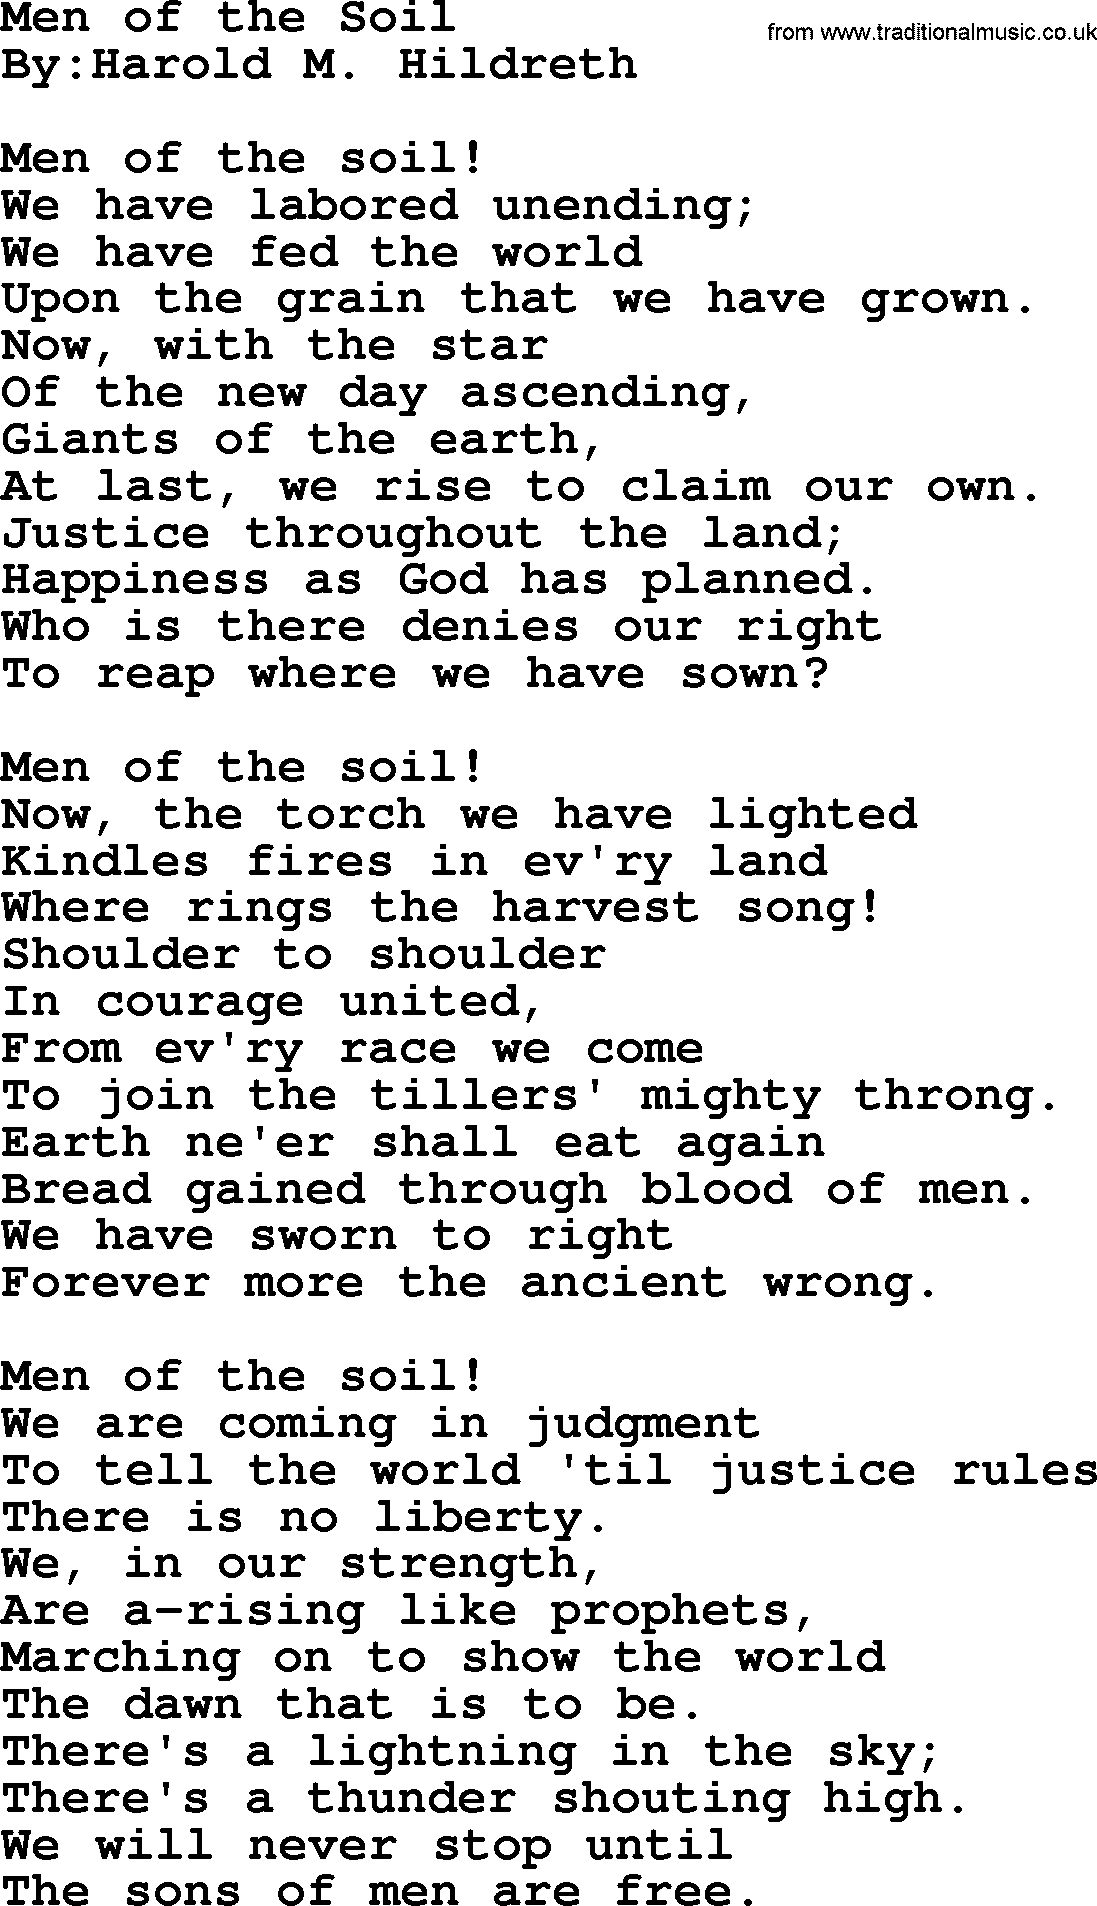 Political, Solidarity, Workers or Union song: Men Of The Soil, lyrics